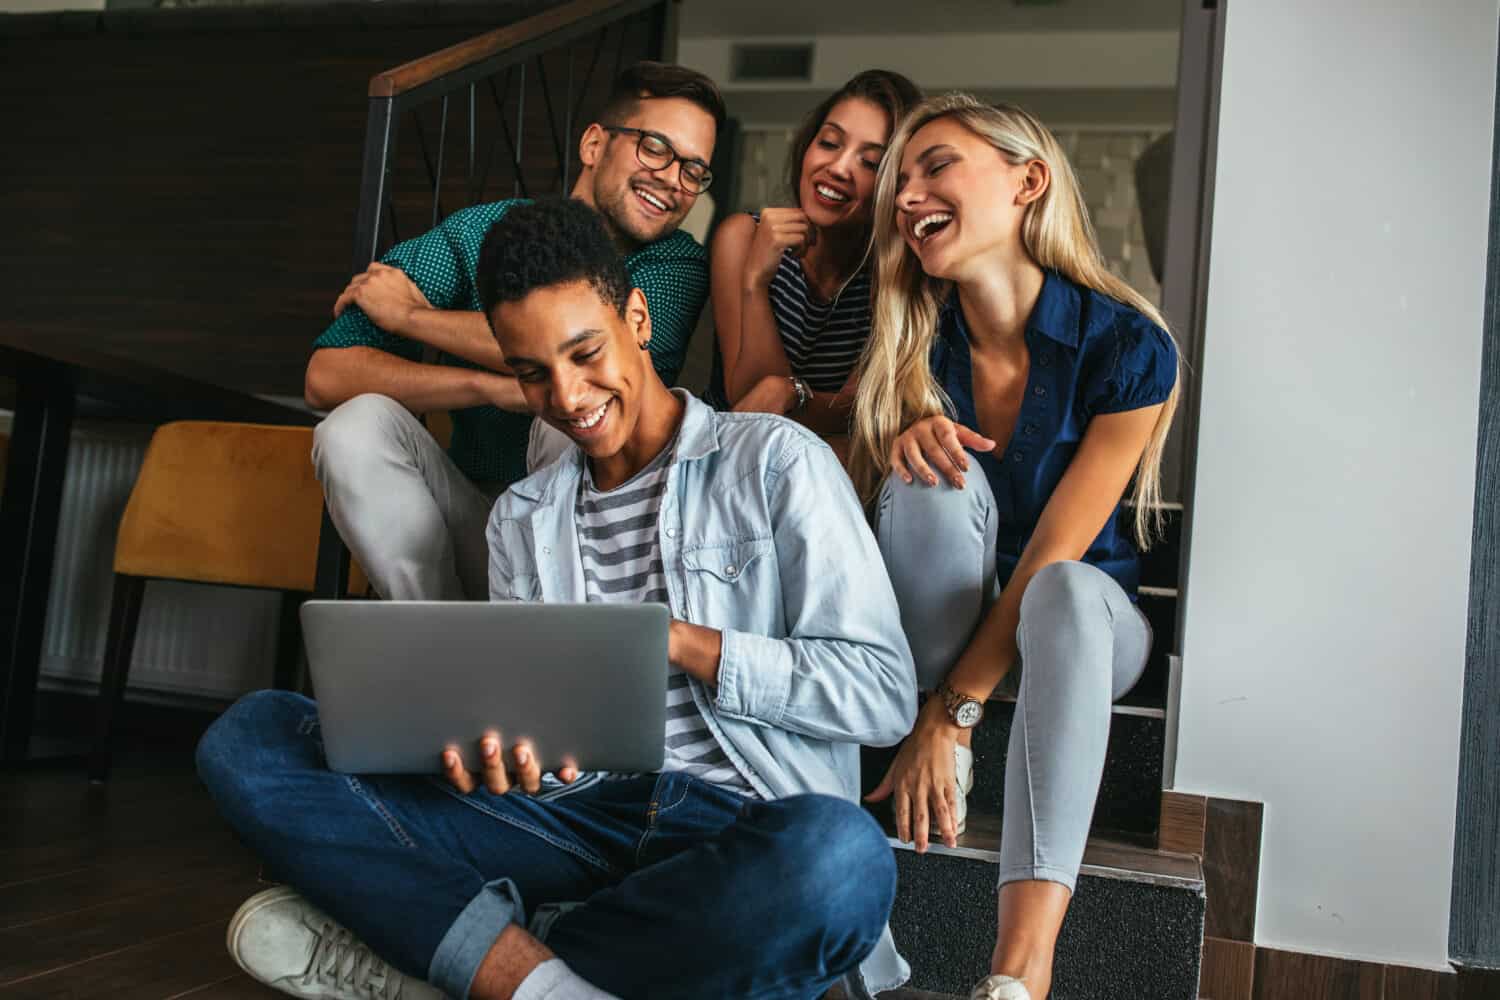 Group of friends sitting and watching something on a laptop computer